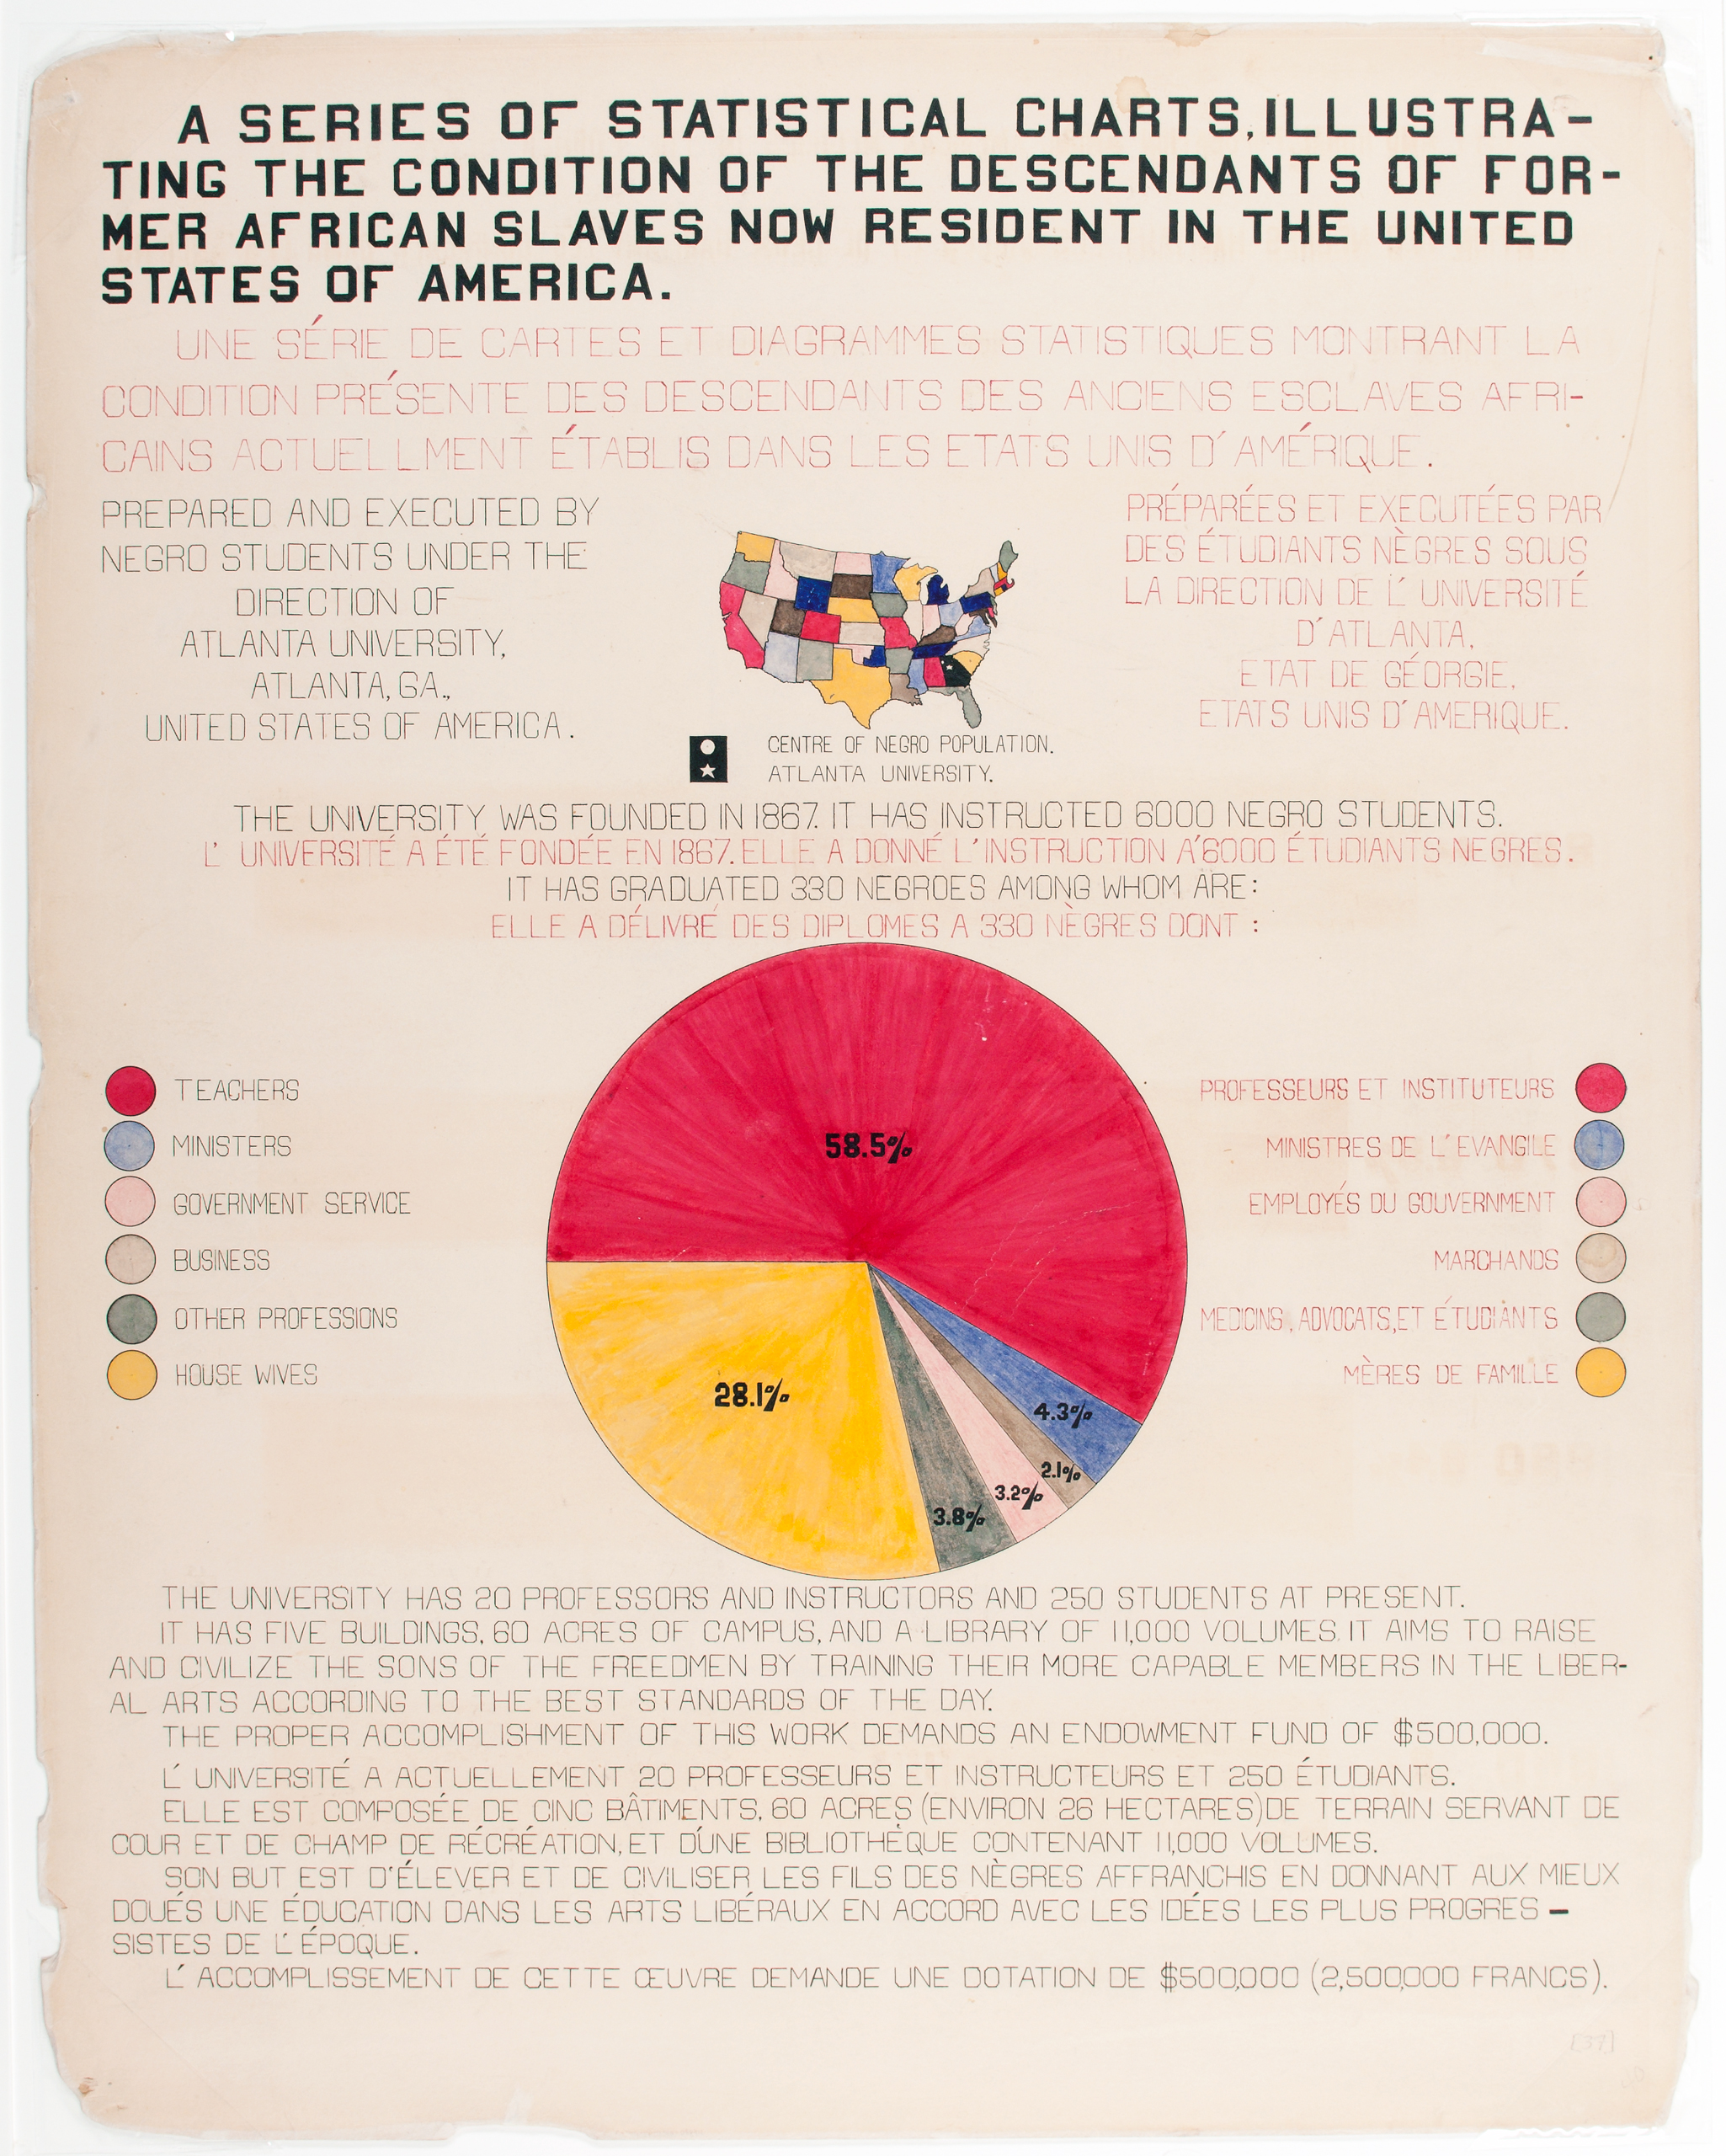 Chart prepared by Atlanta University students for the Negro Exhibit of the American Section at the Paris Exposition Universelle in 1900 to show the economic and social progress of African Americans since emancipation. (Library of Congress Prints and Photographs Division)